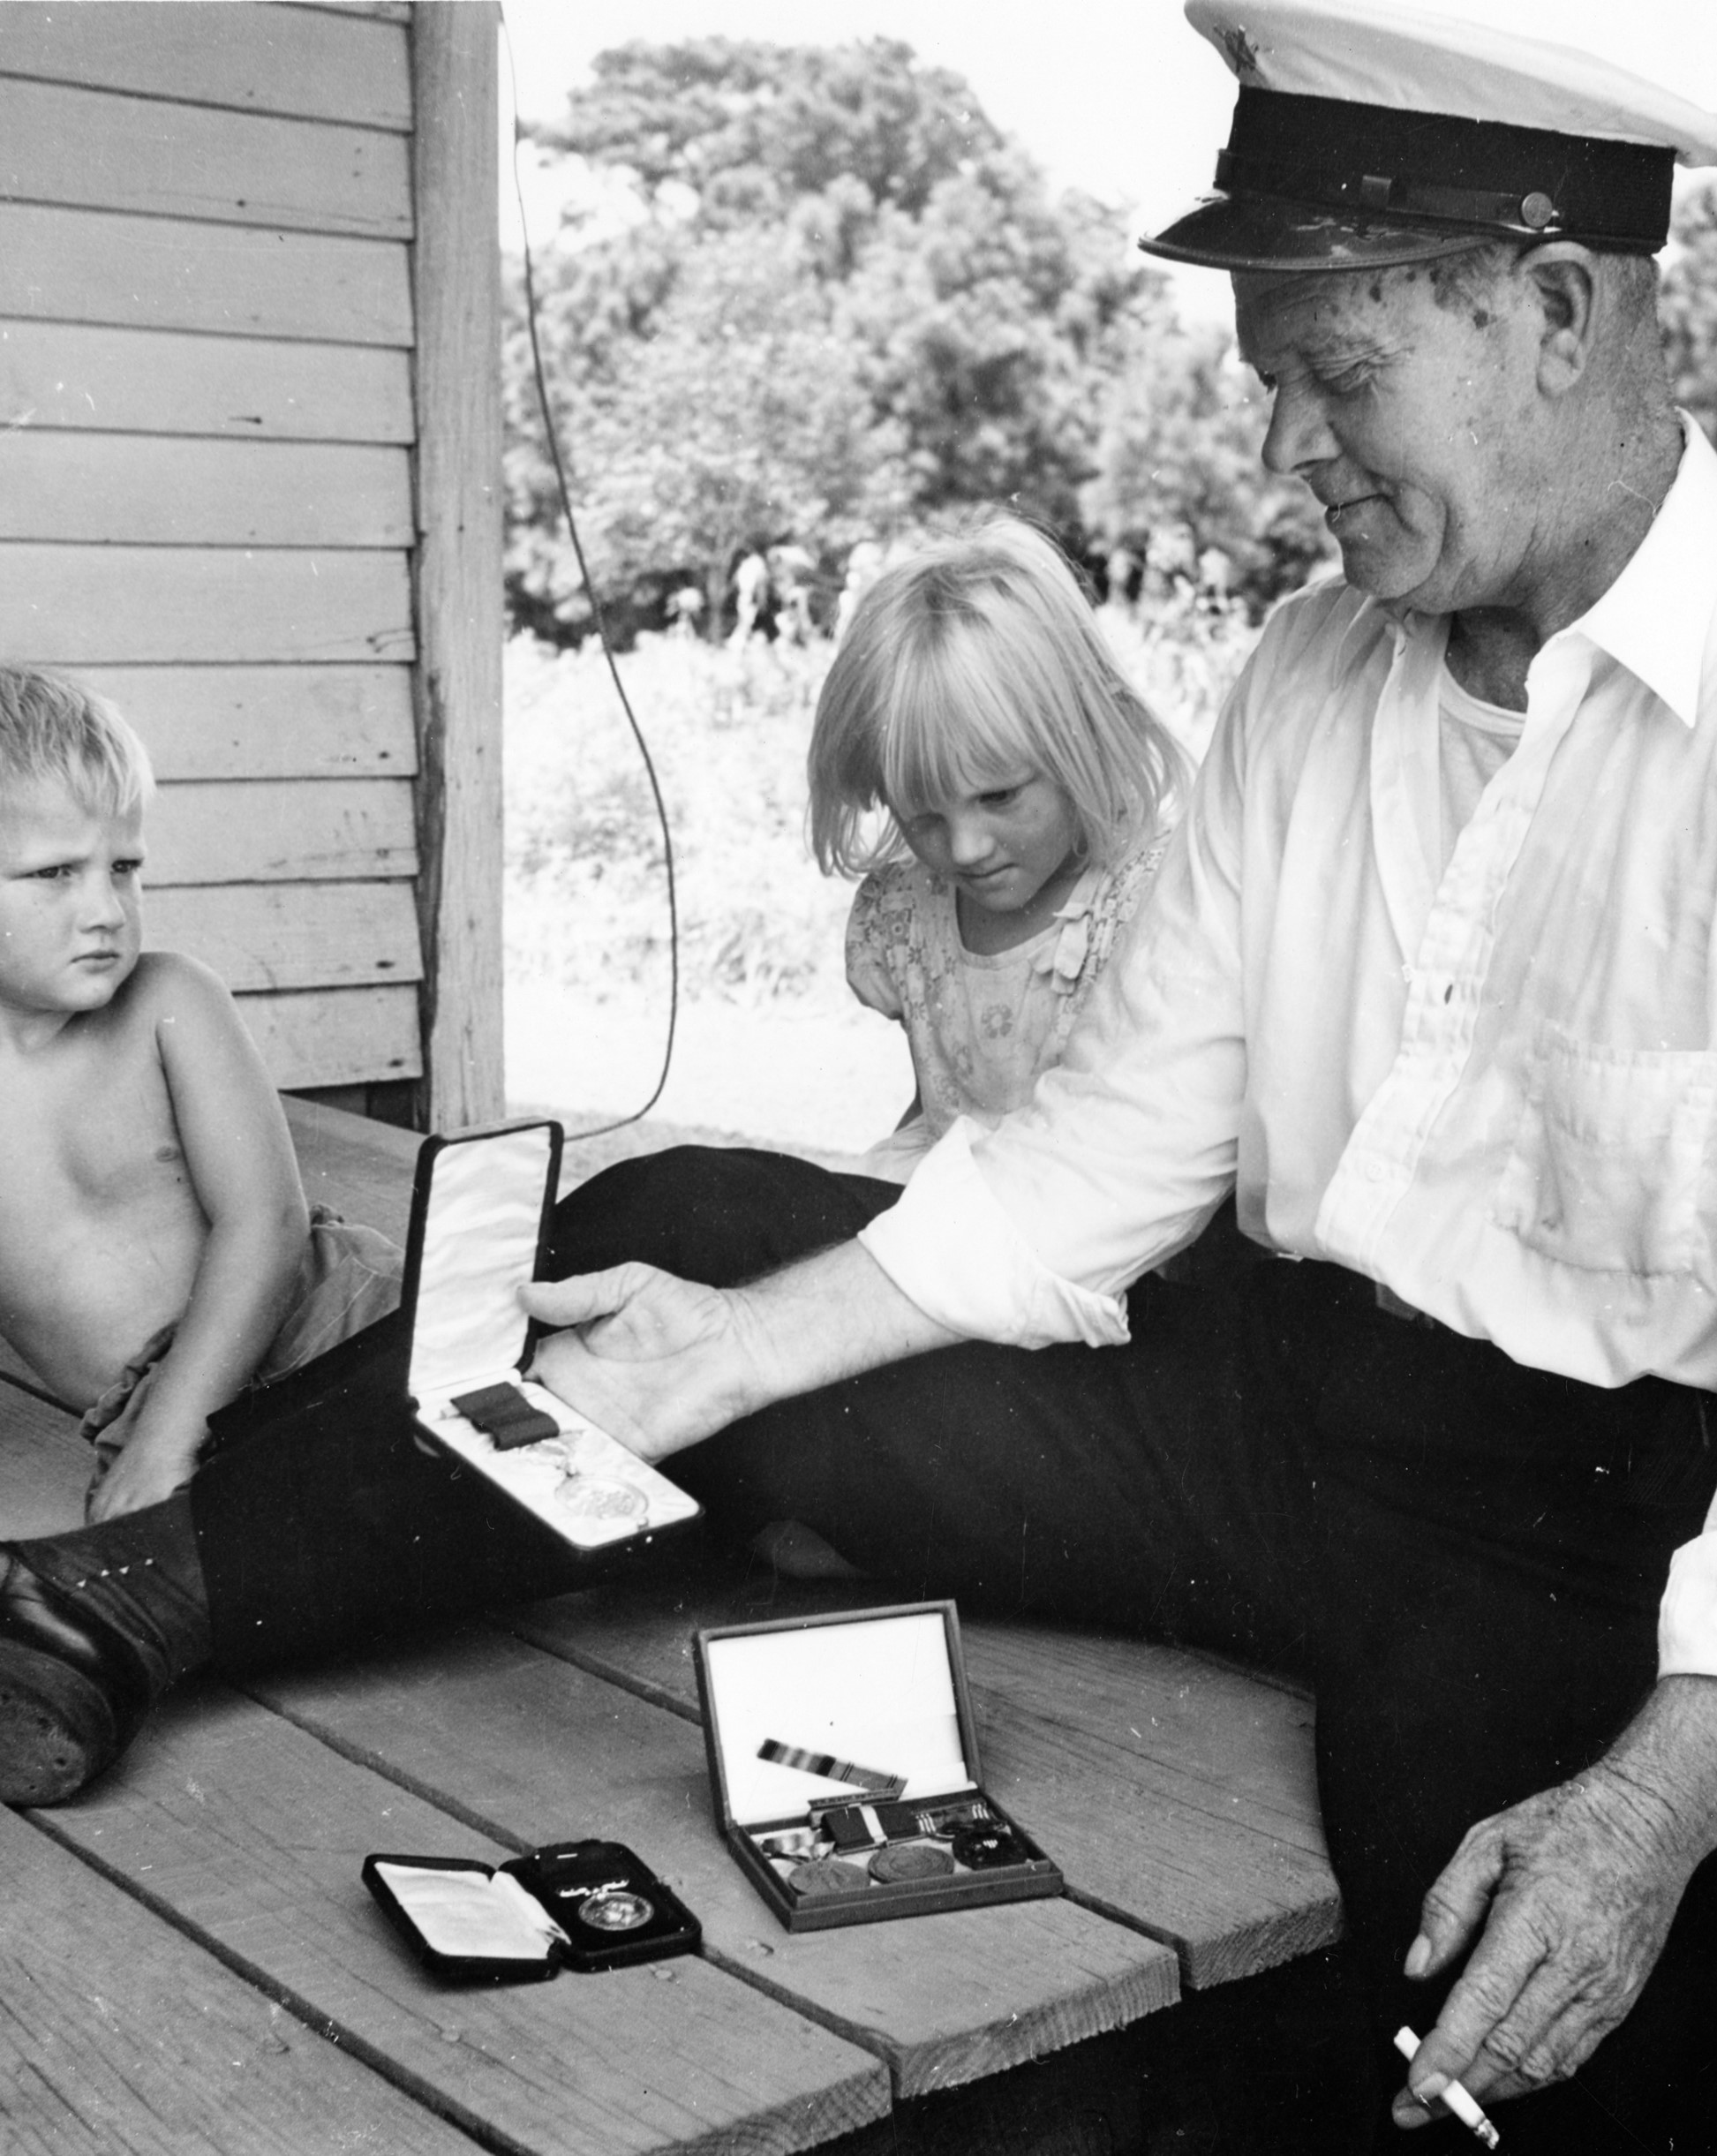 Leroy Midgett showing his lifesaving medals to young Midgett family members. (Courtesy of the Outer Banks History Center)